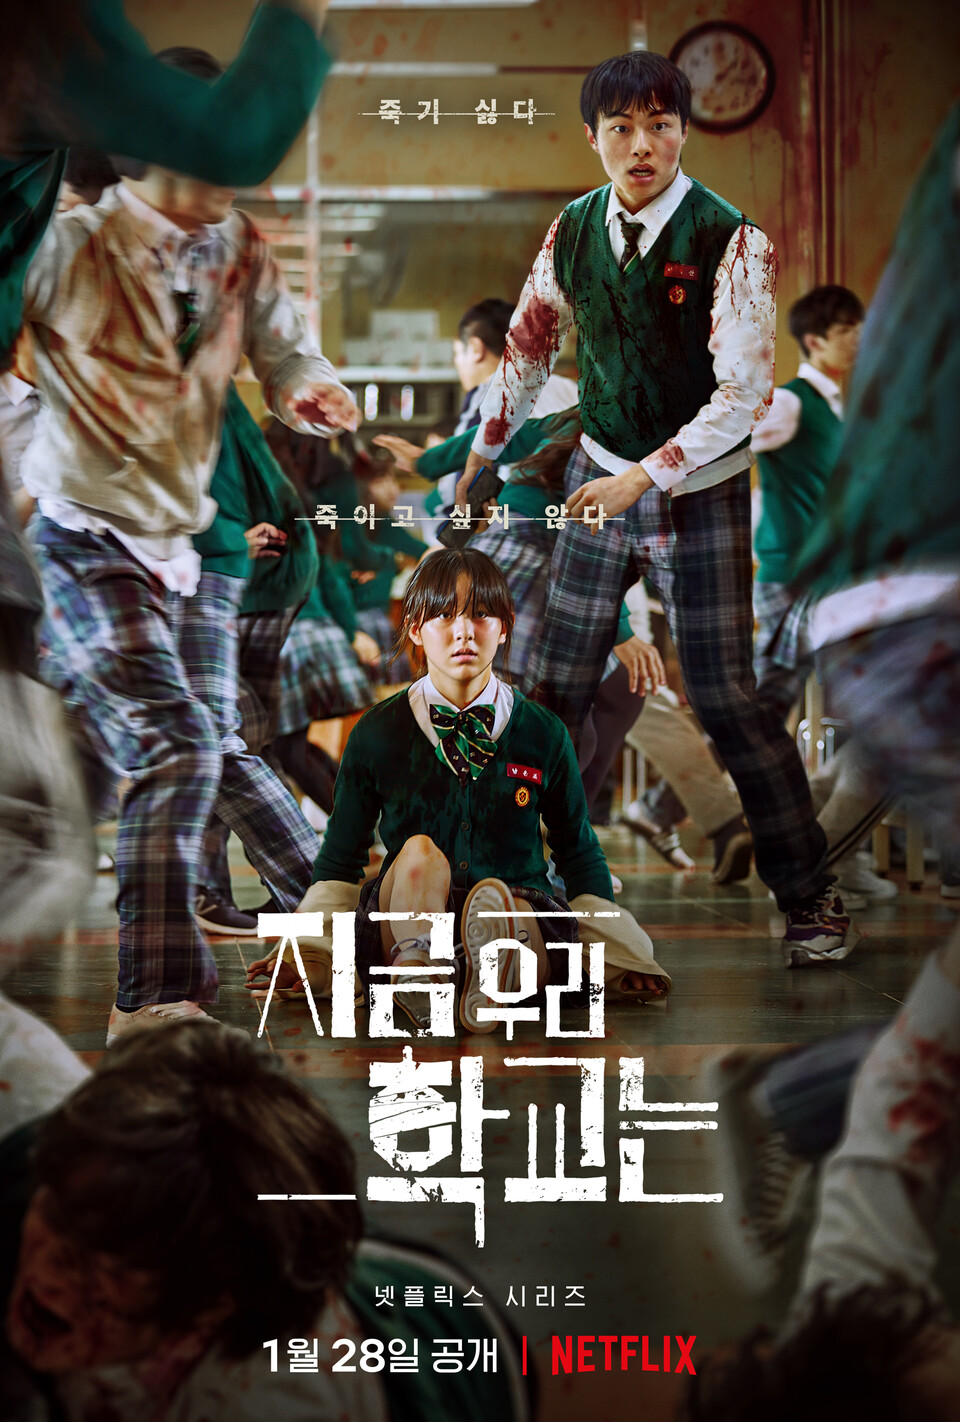 Photos New Posters Added for the Upcoming Korean Drama 'All of Us Are Dead' HanCinema